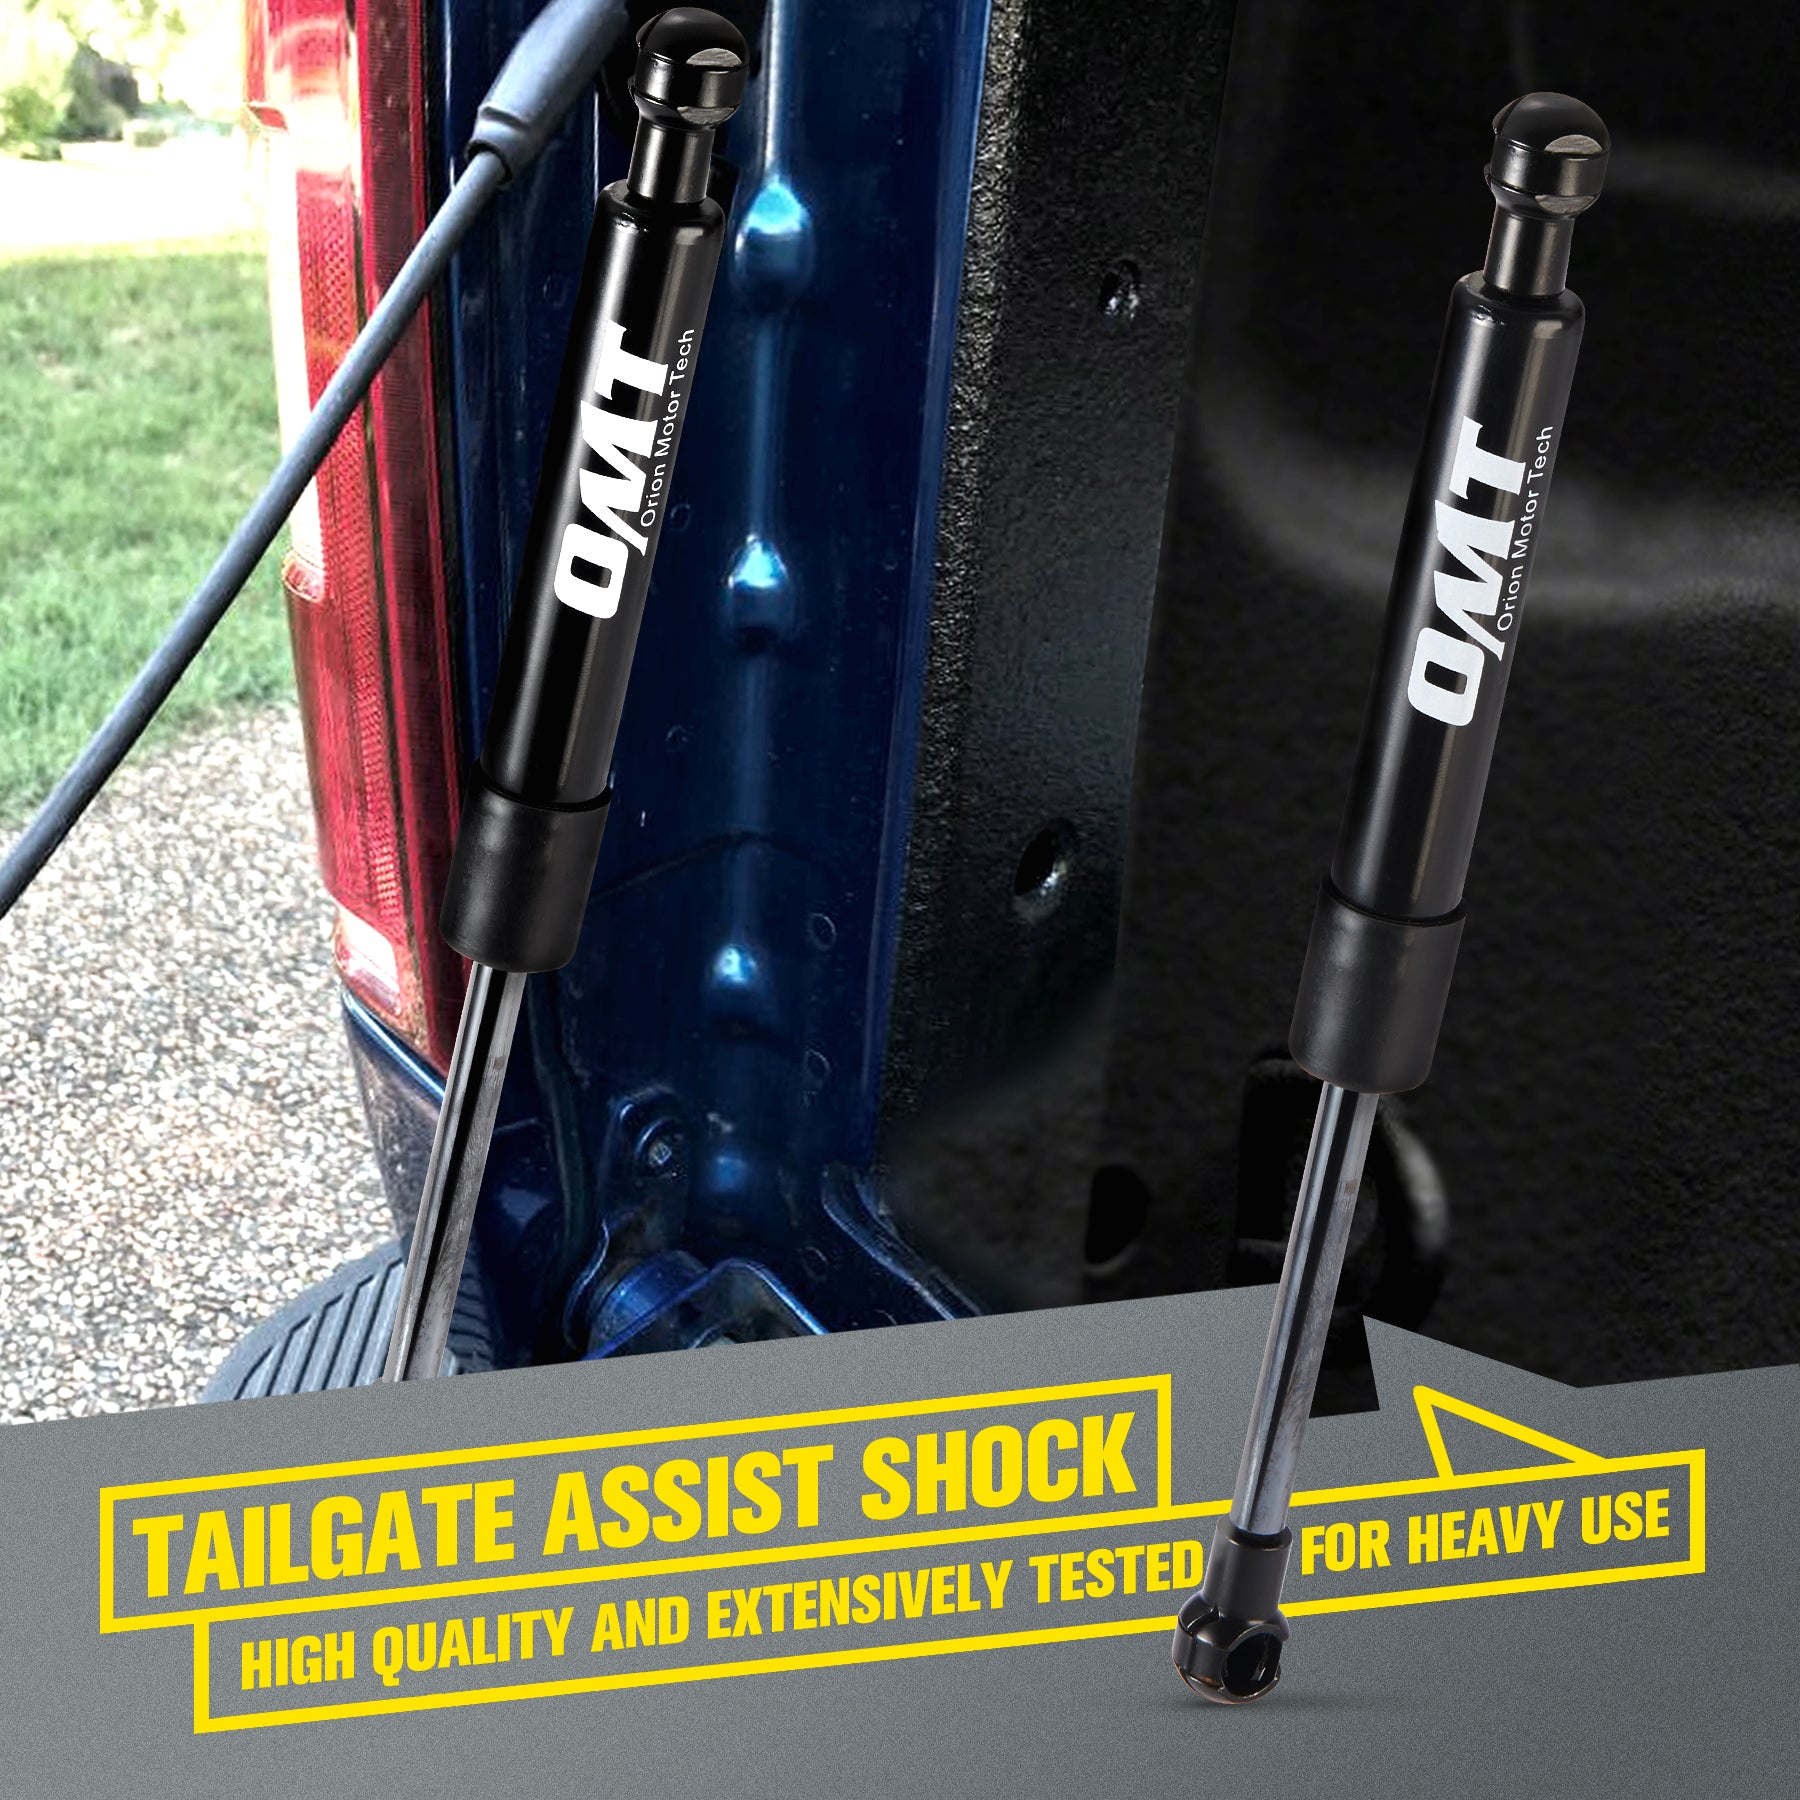 Tailgate Shock Assist